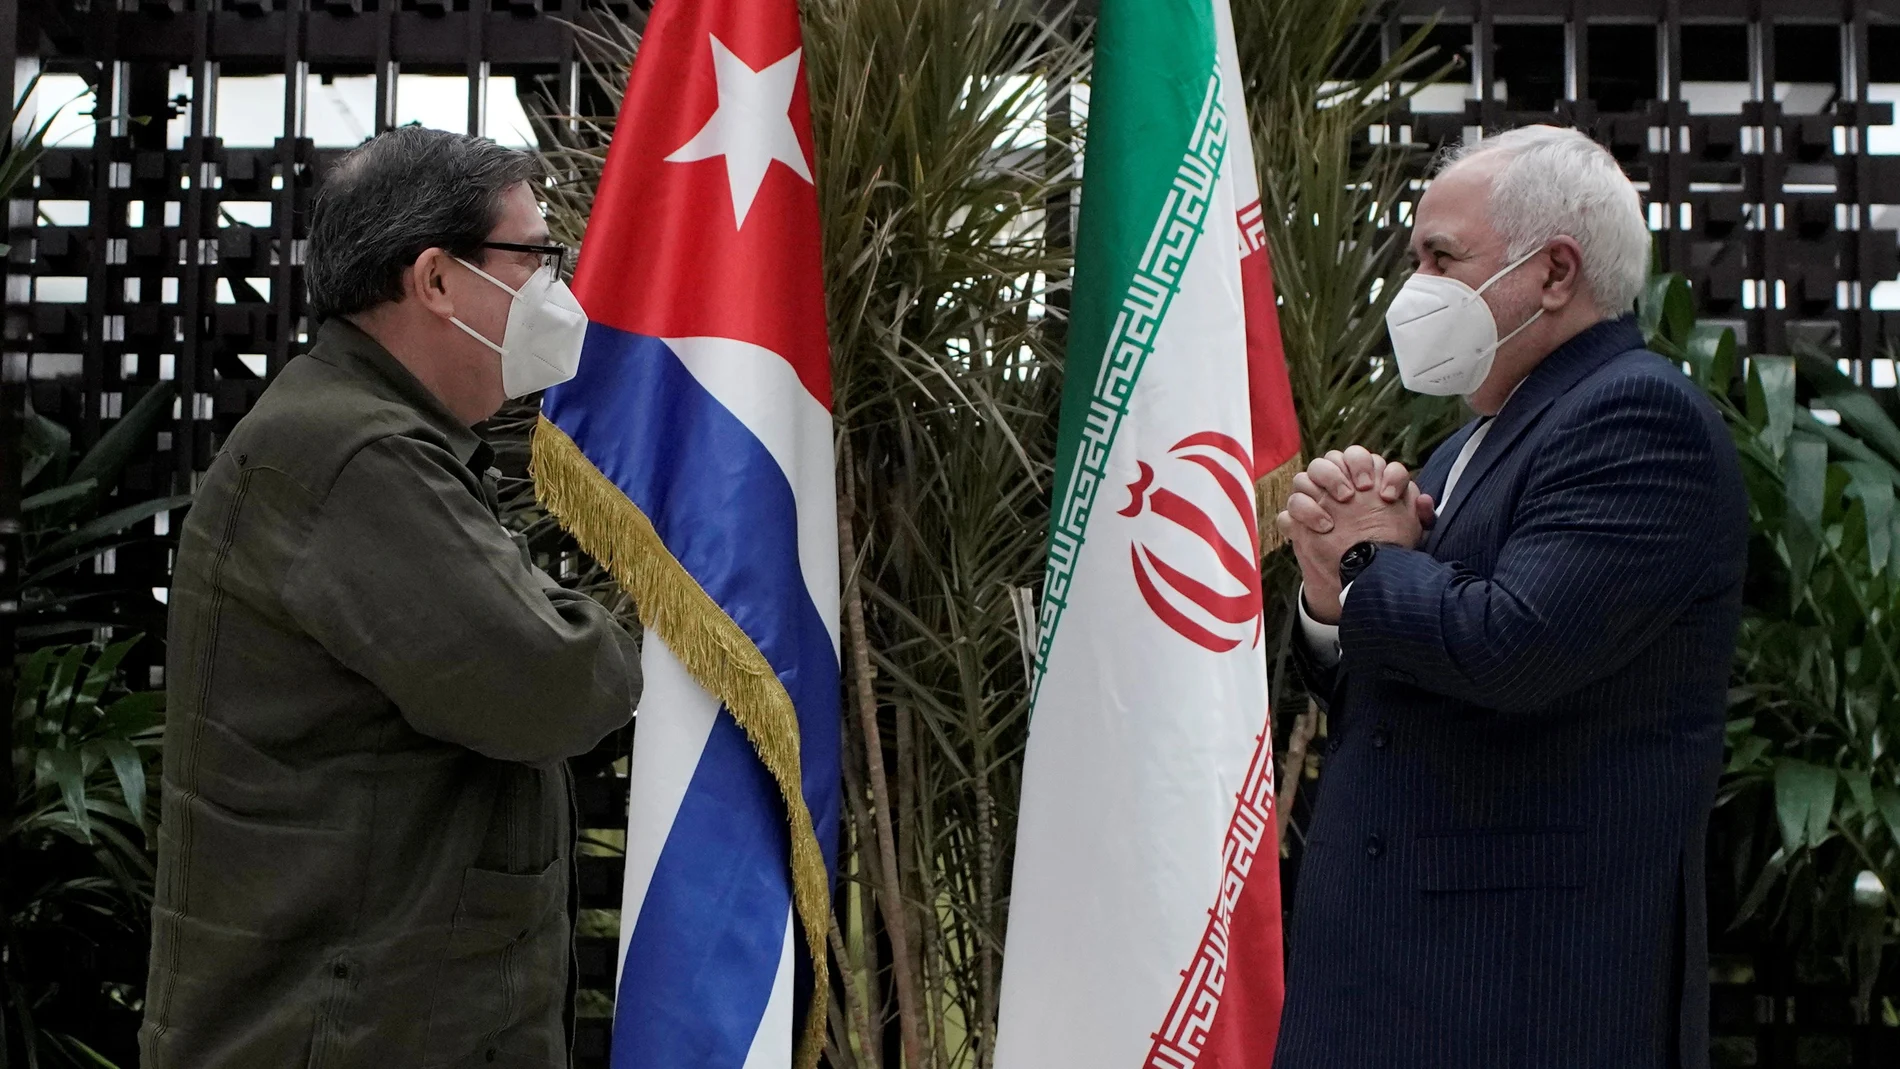 Cuba's Foreign Minister Bruno Rodriguez receives Iran's Foreign Minister Mohammad Javad Zarif during an official visit in Havana, Cuba, November 6, 2020. REUTERS/Alexandre Meneghini